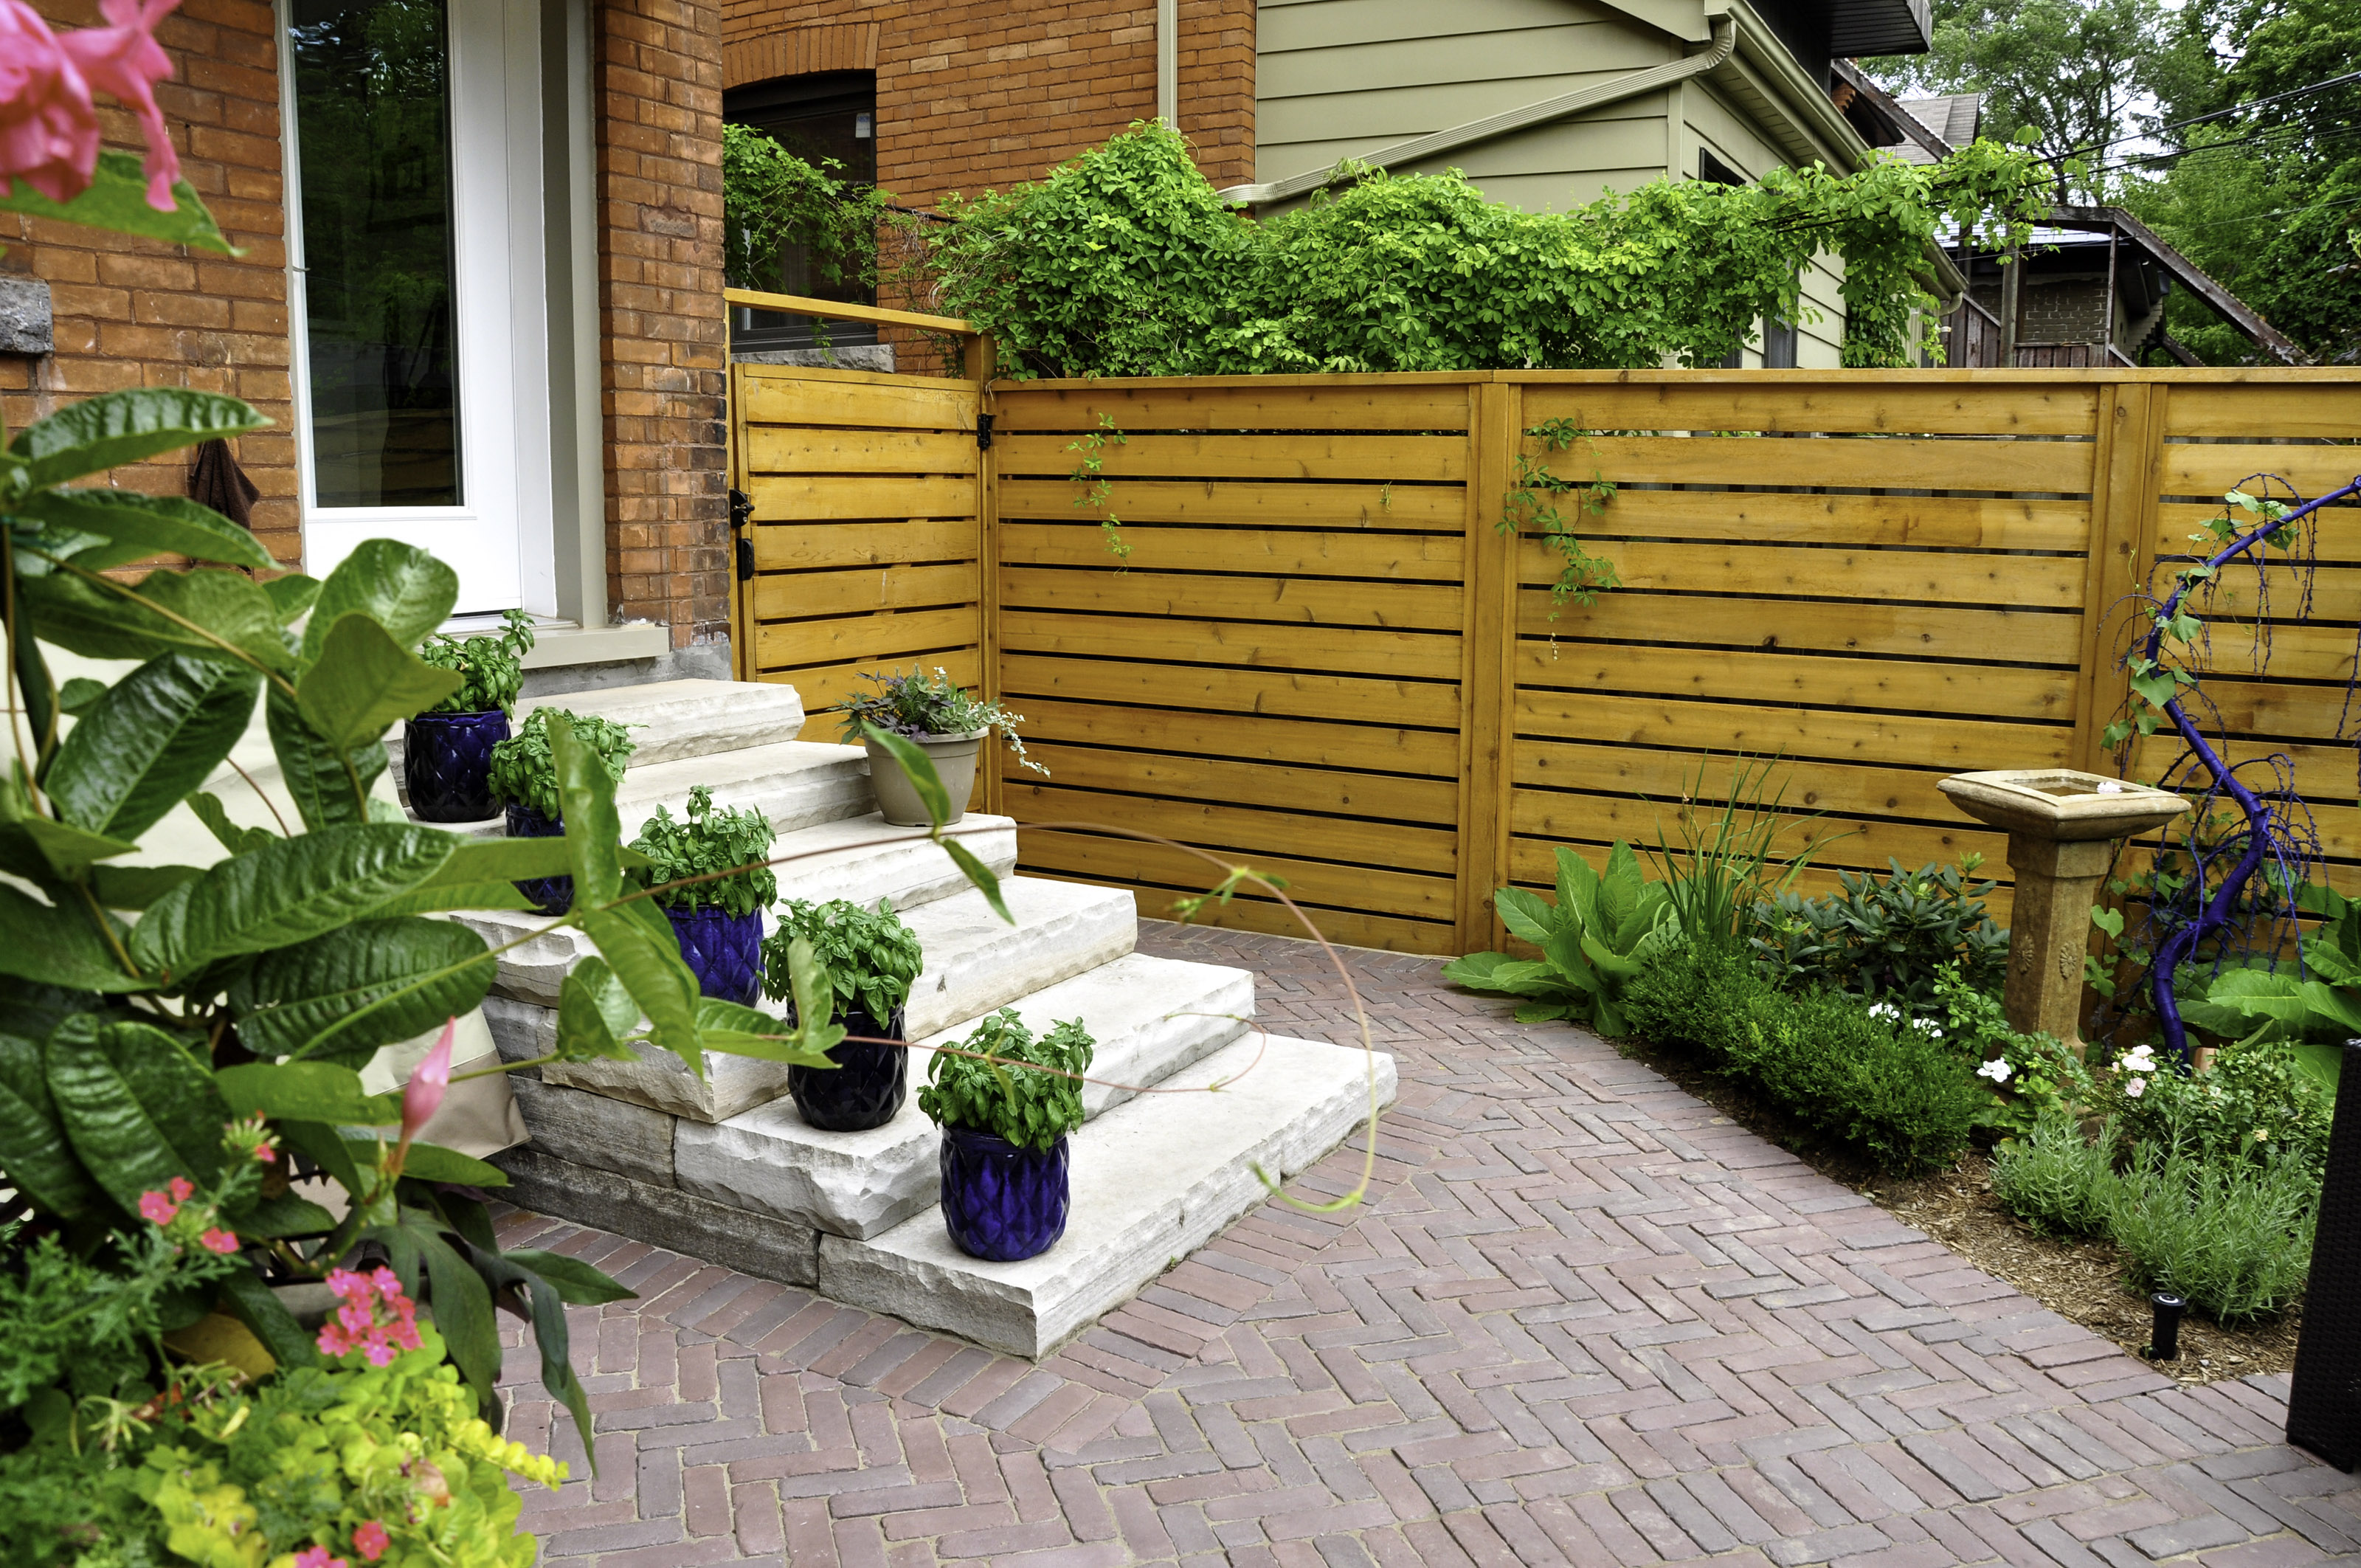 Horizontal cedar privacy fence in a bright and flowering backyard.